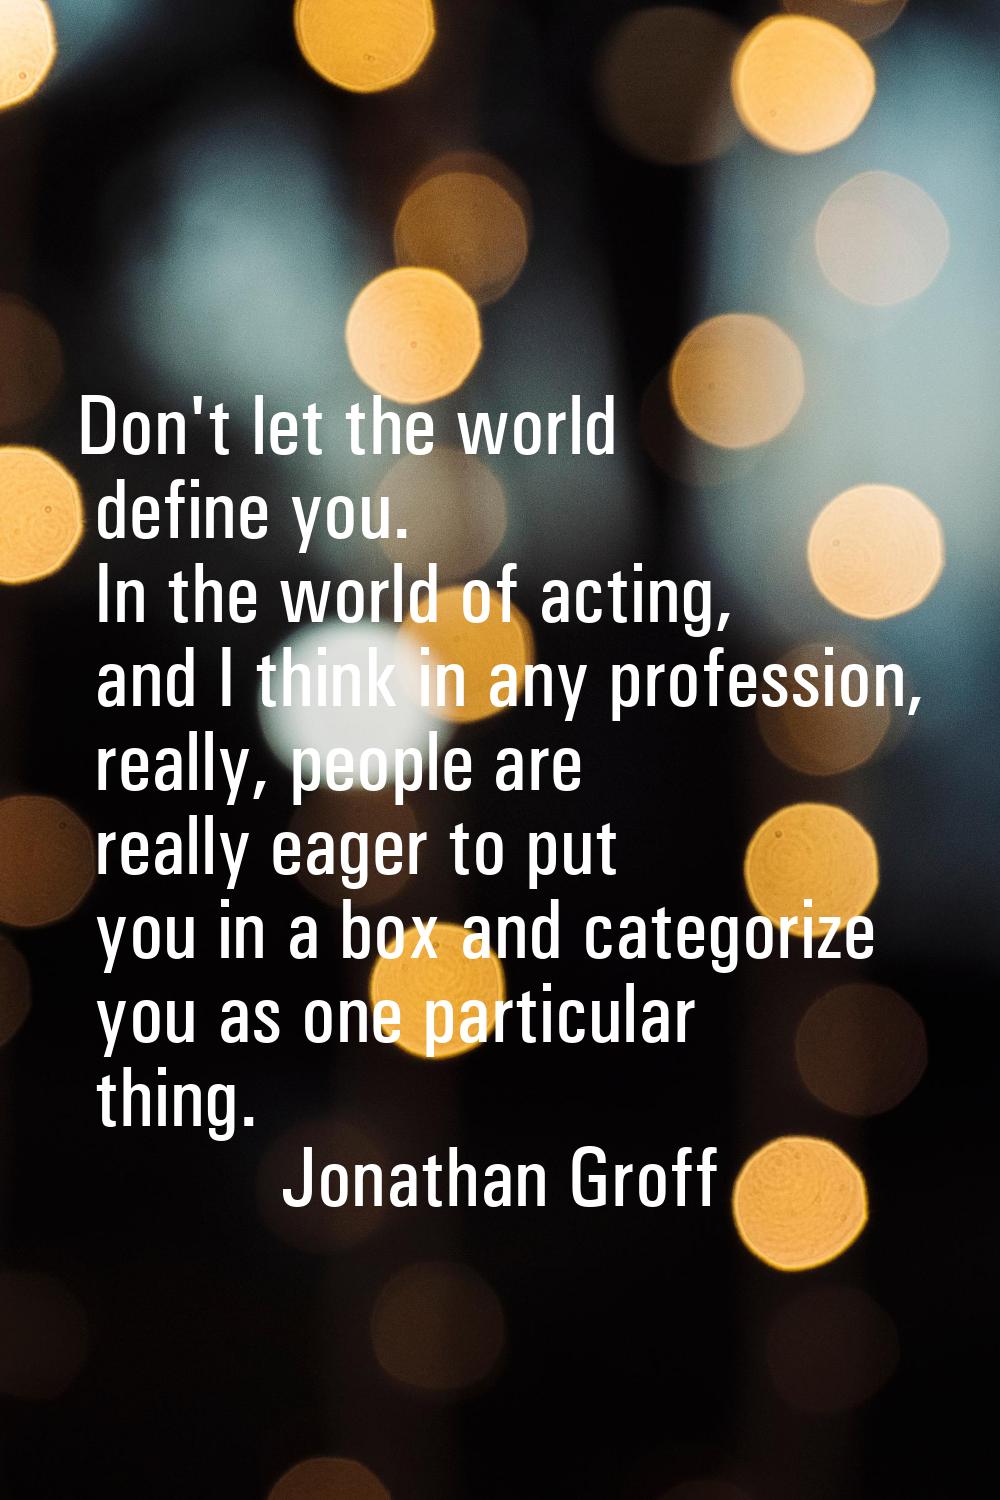 Don't let the world define you. In the world of acting, and I think in any profession, really, peop